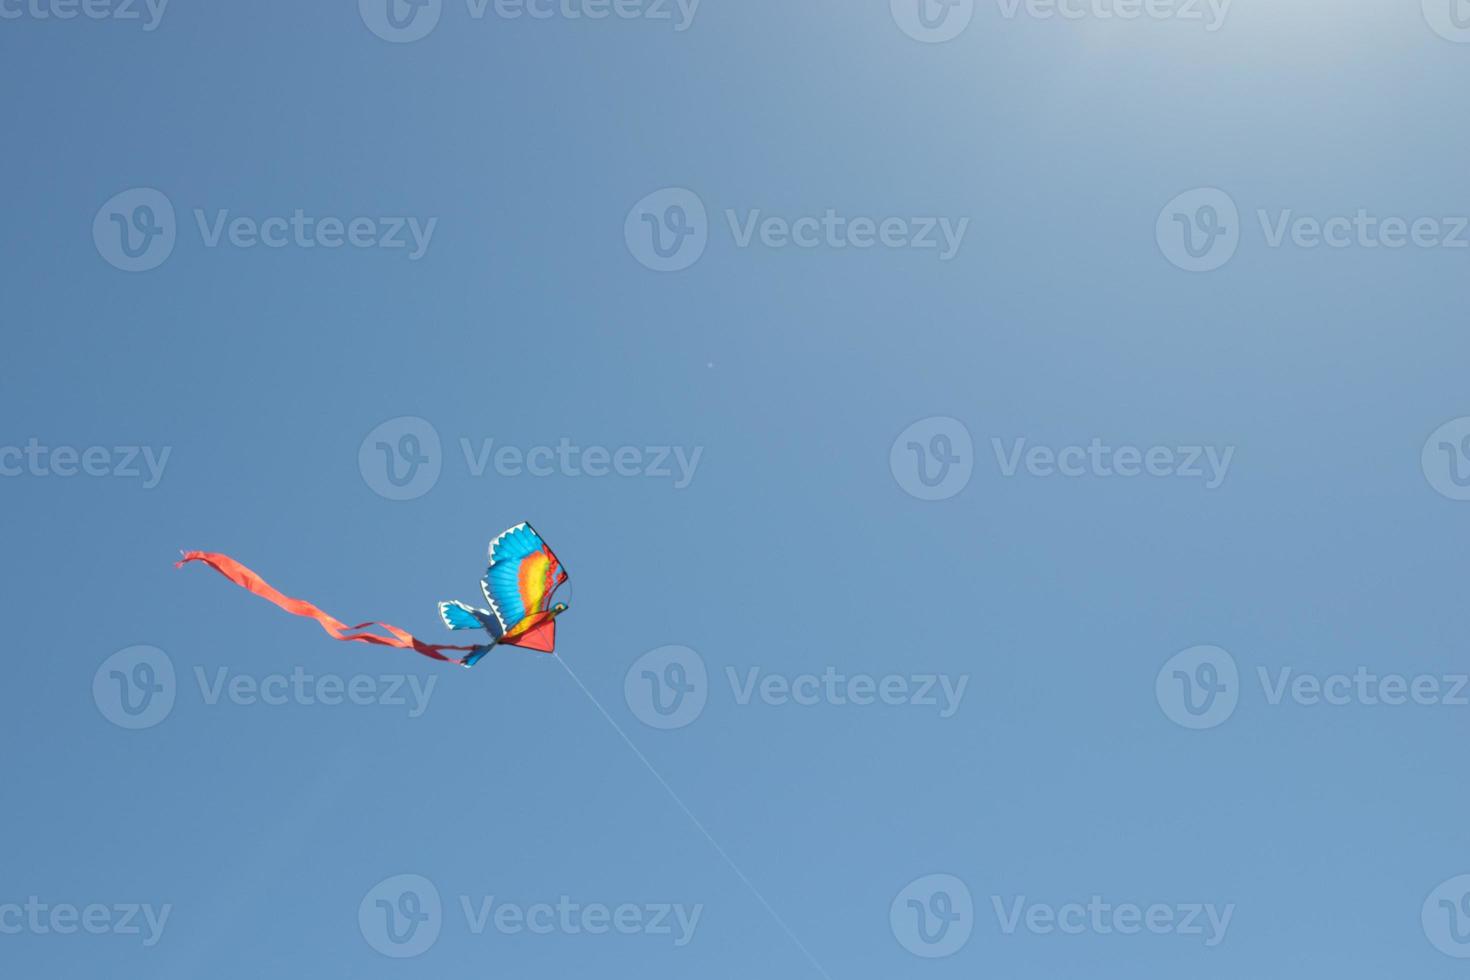 Kite soars in the blue sky. Copy space background. Freedom concept photo